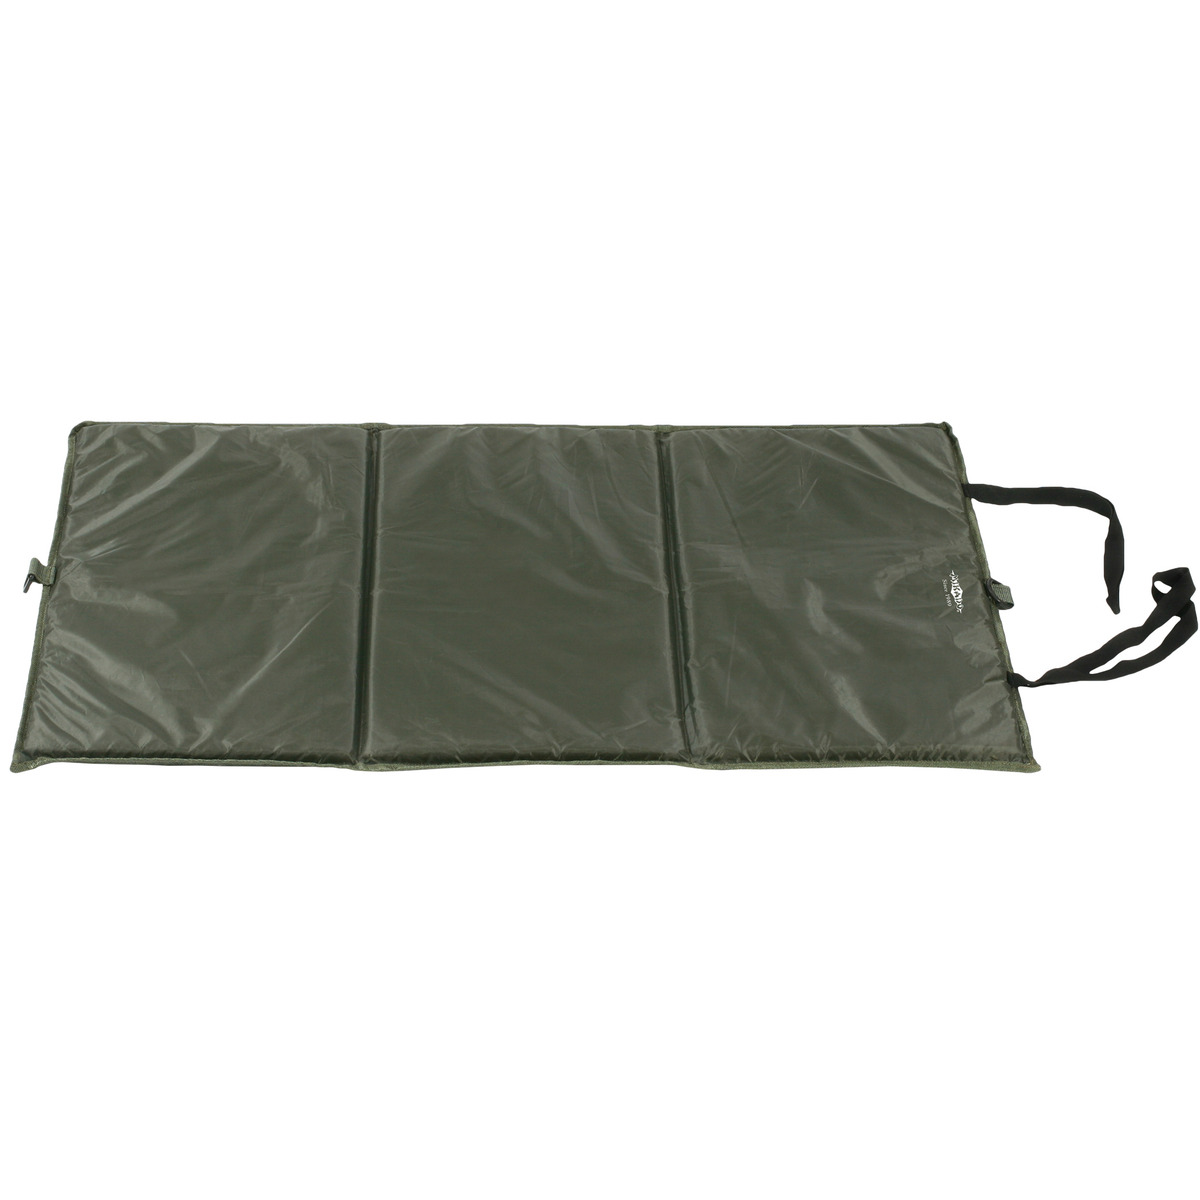 Mikado Mat - FIRST MAT  FOR UNHOOKING AND WEIGHING 87x49 cm